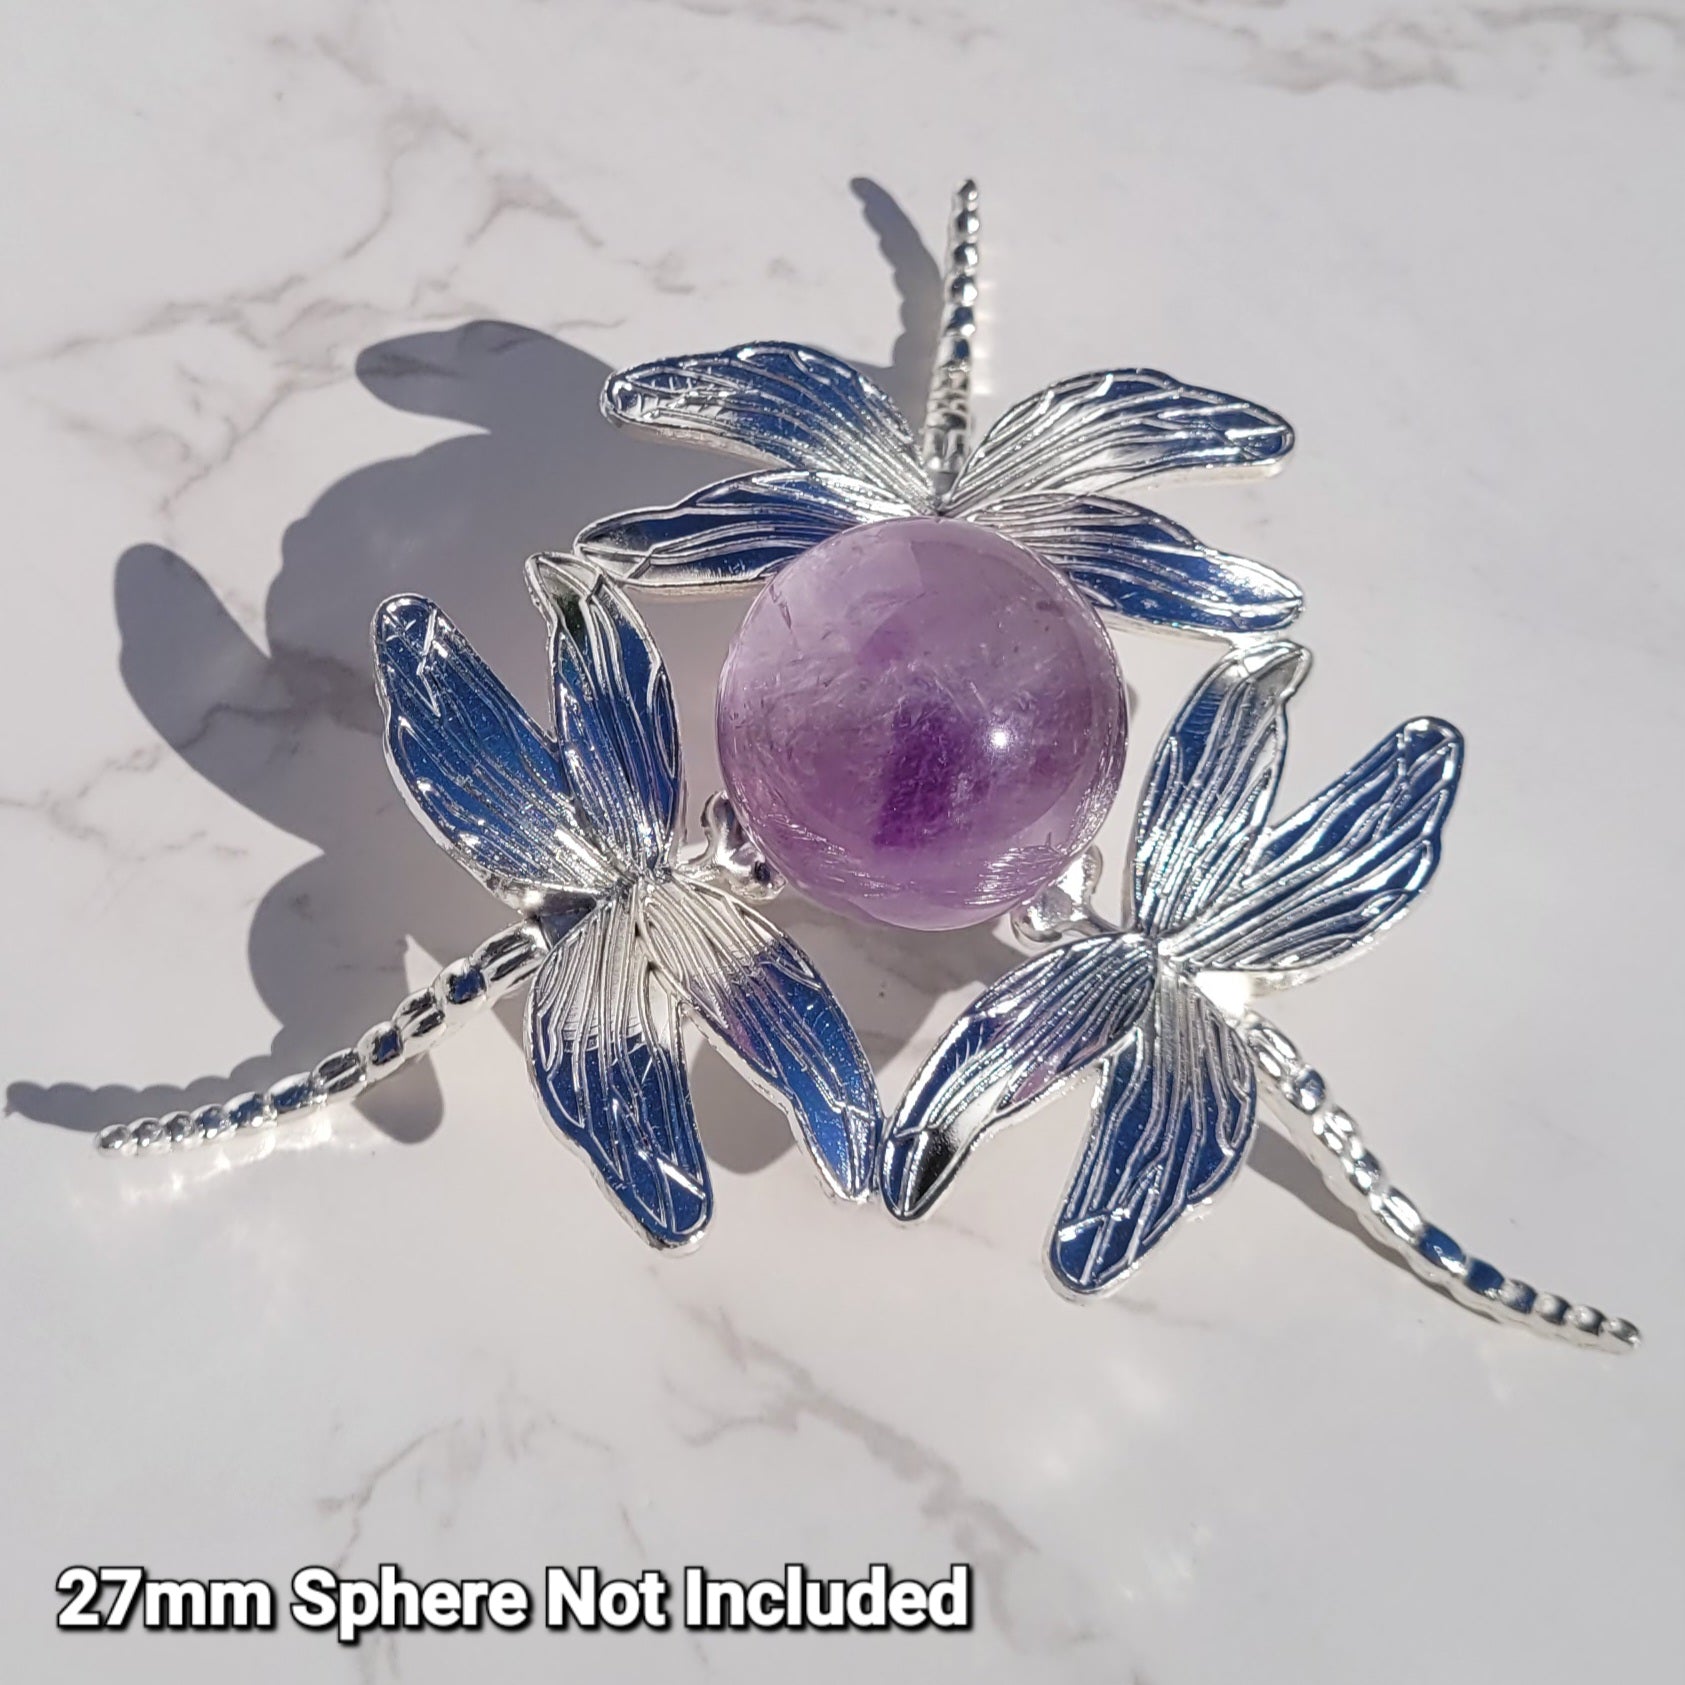 Dragonfly Sphere Holder Stand in Silver, for Crystal Balls 1.1" to 3" (27mm to 77mm) 